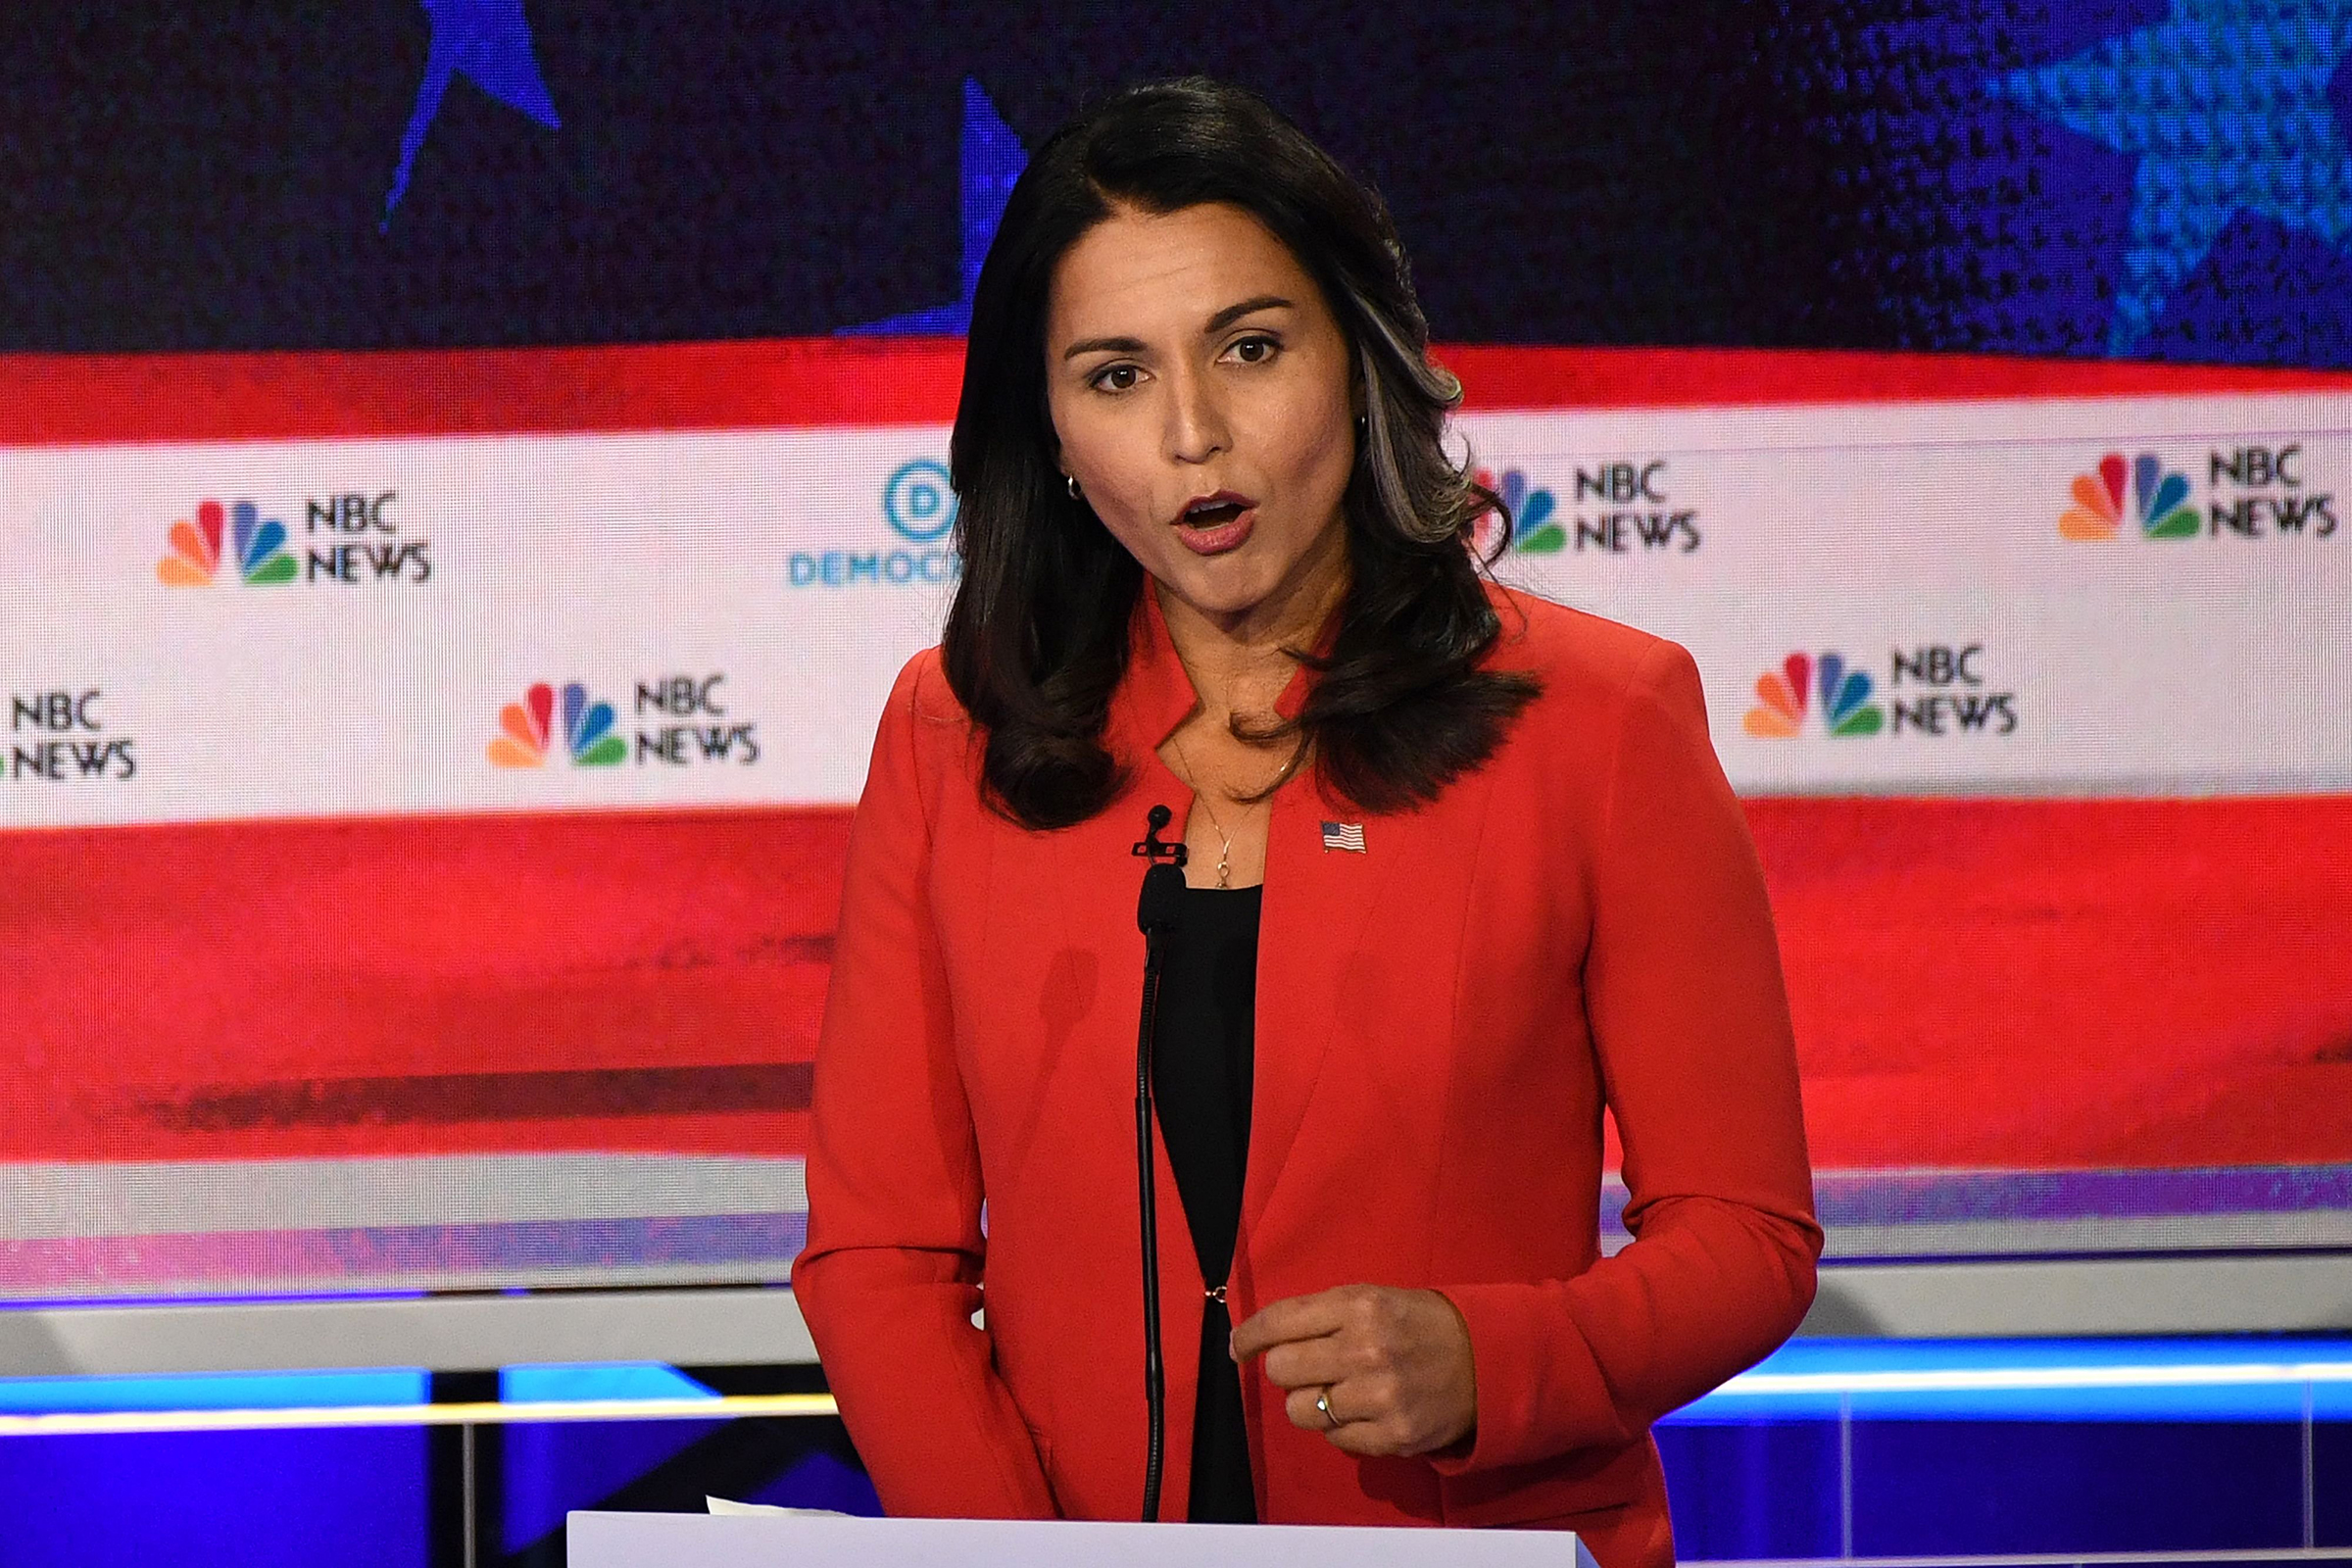 Democratic presidential hopeful US Representative for Hawaii's 2nd congressional district Tulsi Gabbard speaks during the first Democratic primary debate of the 2020 presidential campaign season hosted by NBC News at the Adrienne Arsht Center for the Performing Arts in Miami, Florida, June 26, 2019. (Jim Watson—AFP/Getty Images)